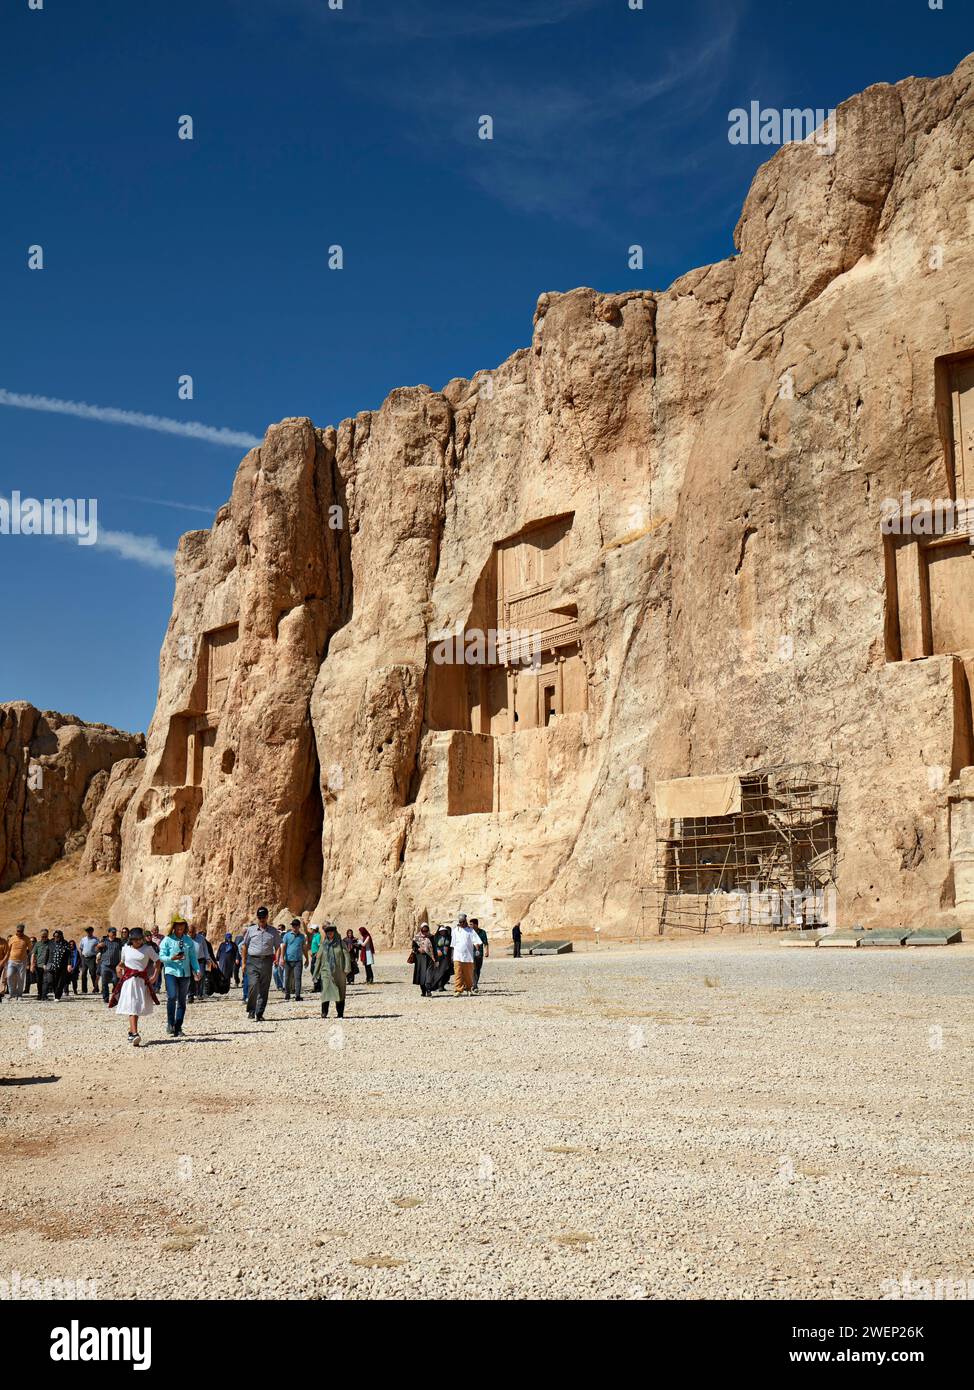 A group of tourists walk in Naqsh-e Rostam Necropolis, low rocky hill with rock-cut tombs of kings of Achaemenian dynasty near Persepolis, Iran. Stock Photo